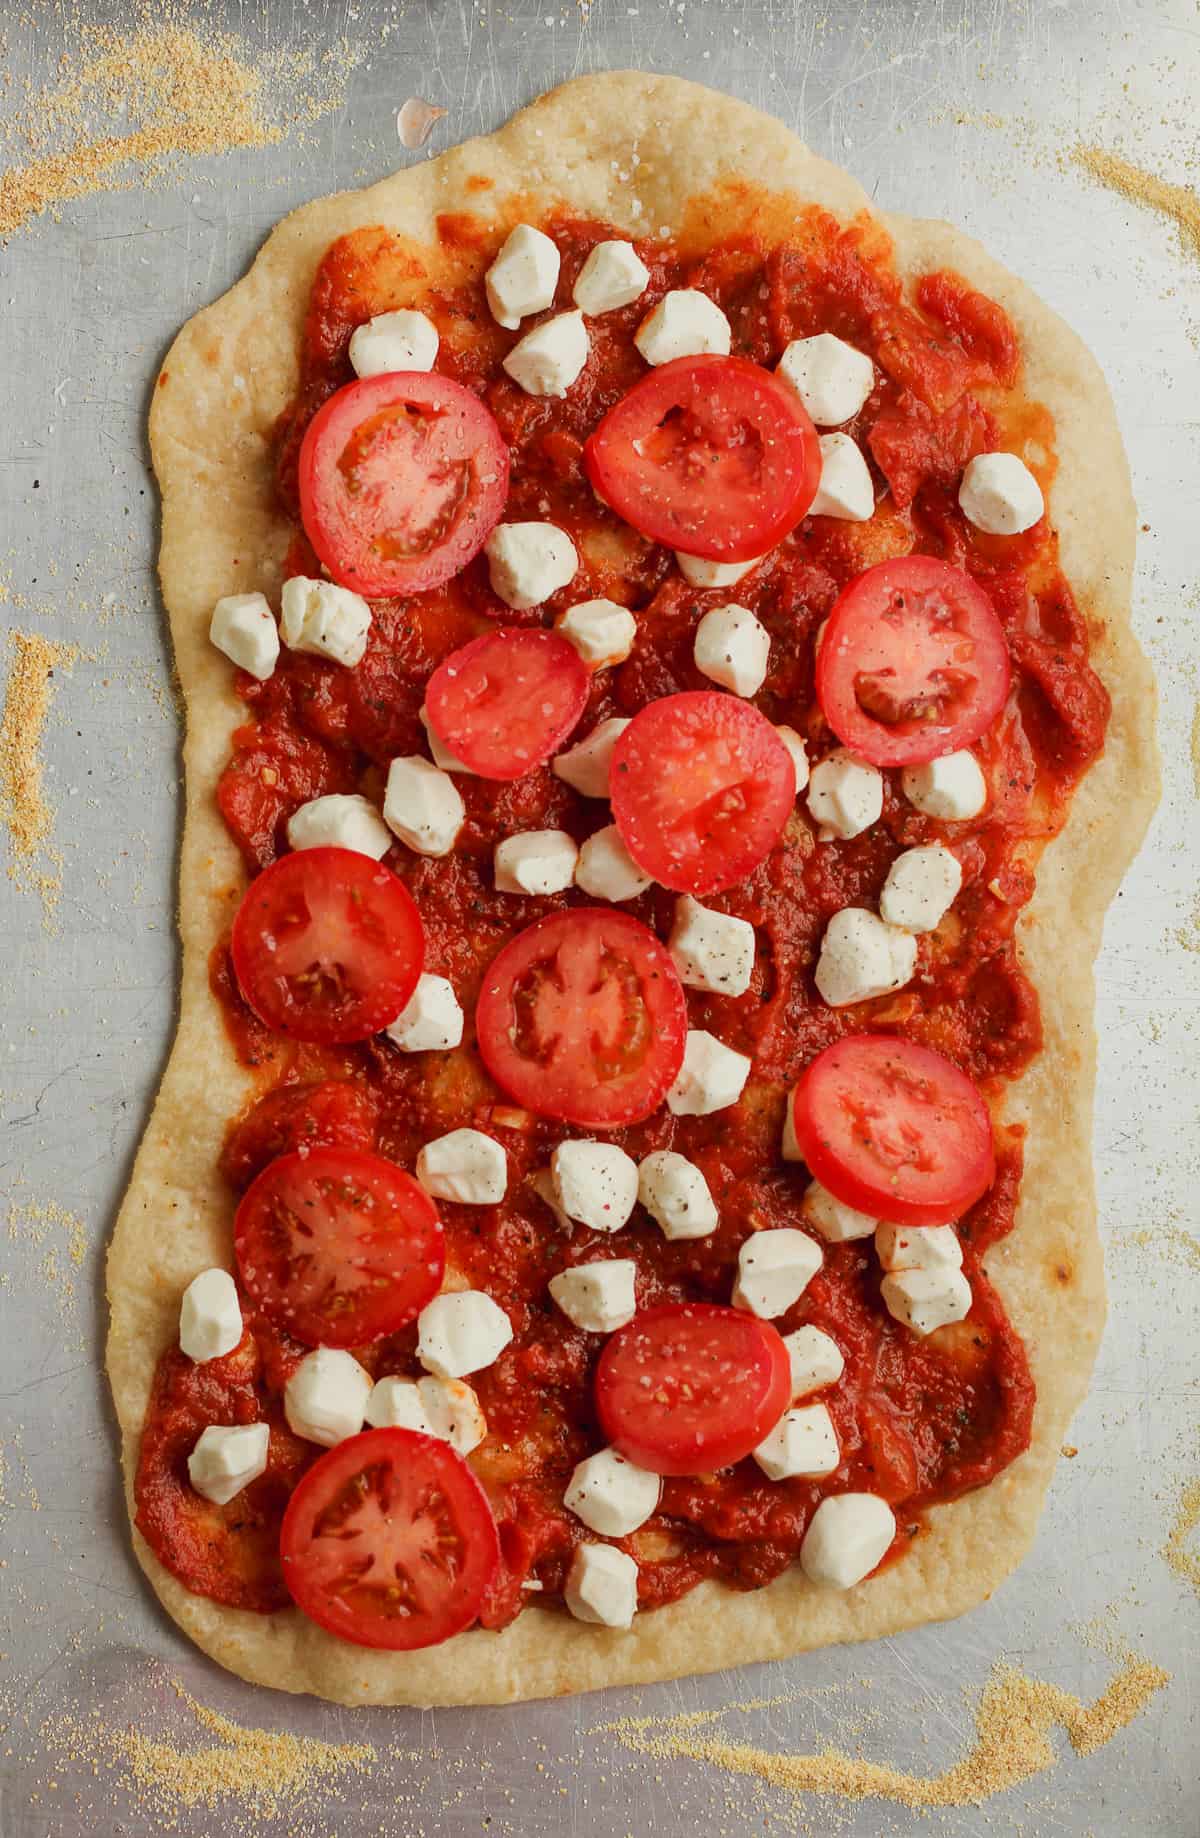 Par-baked flatbread with the toppings on top.